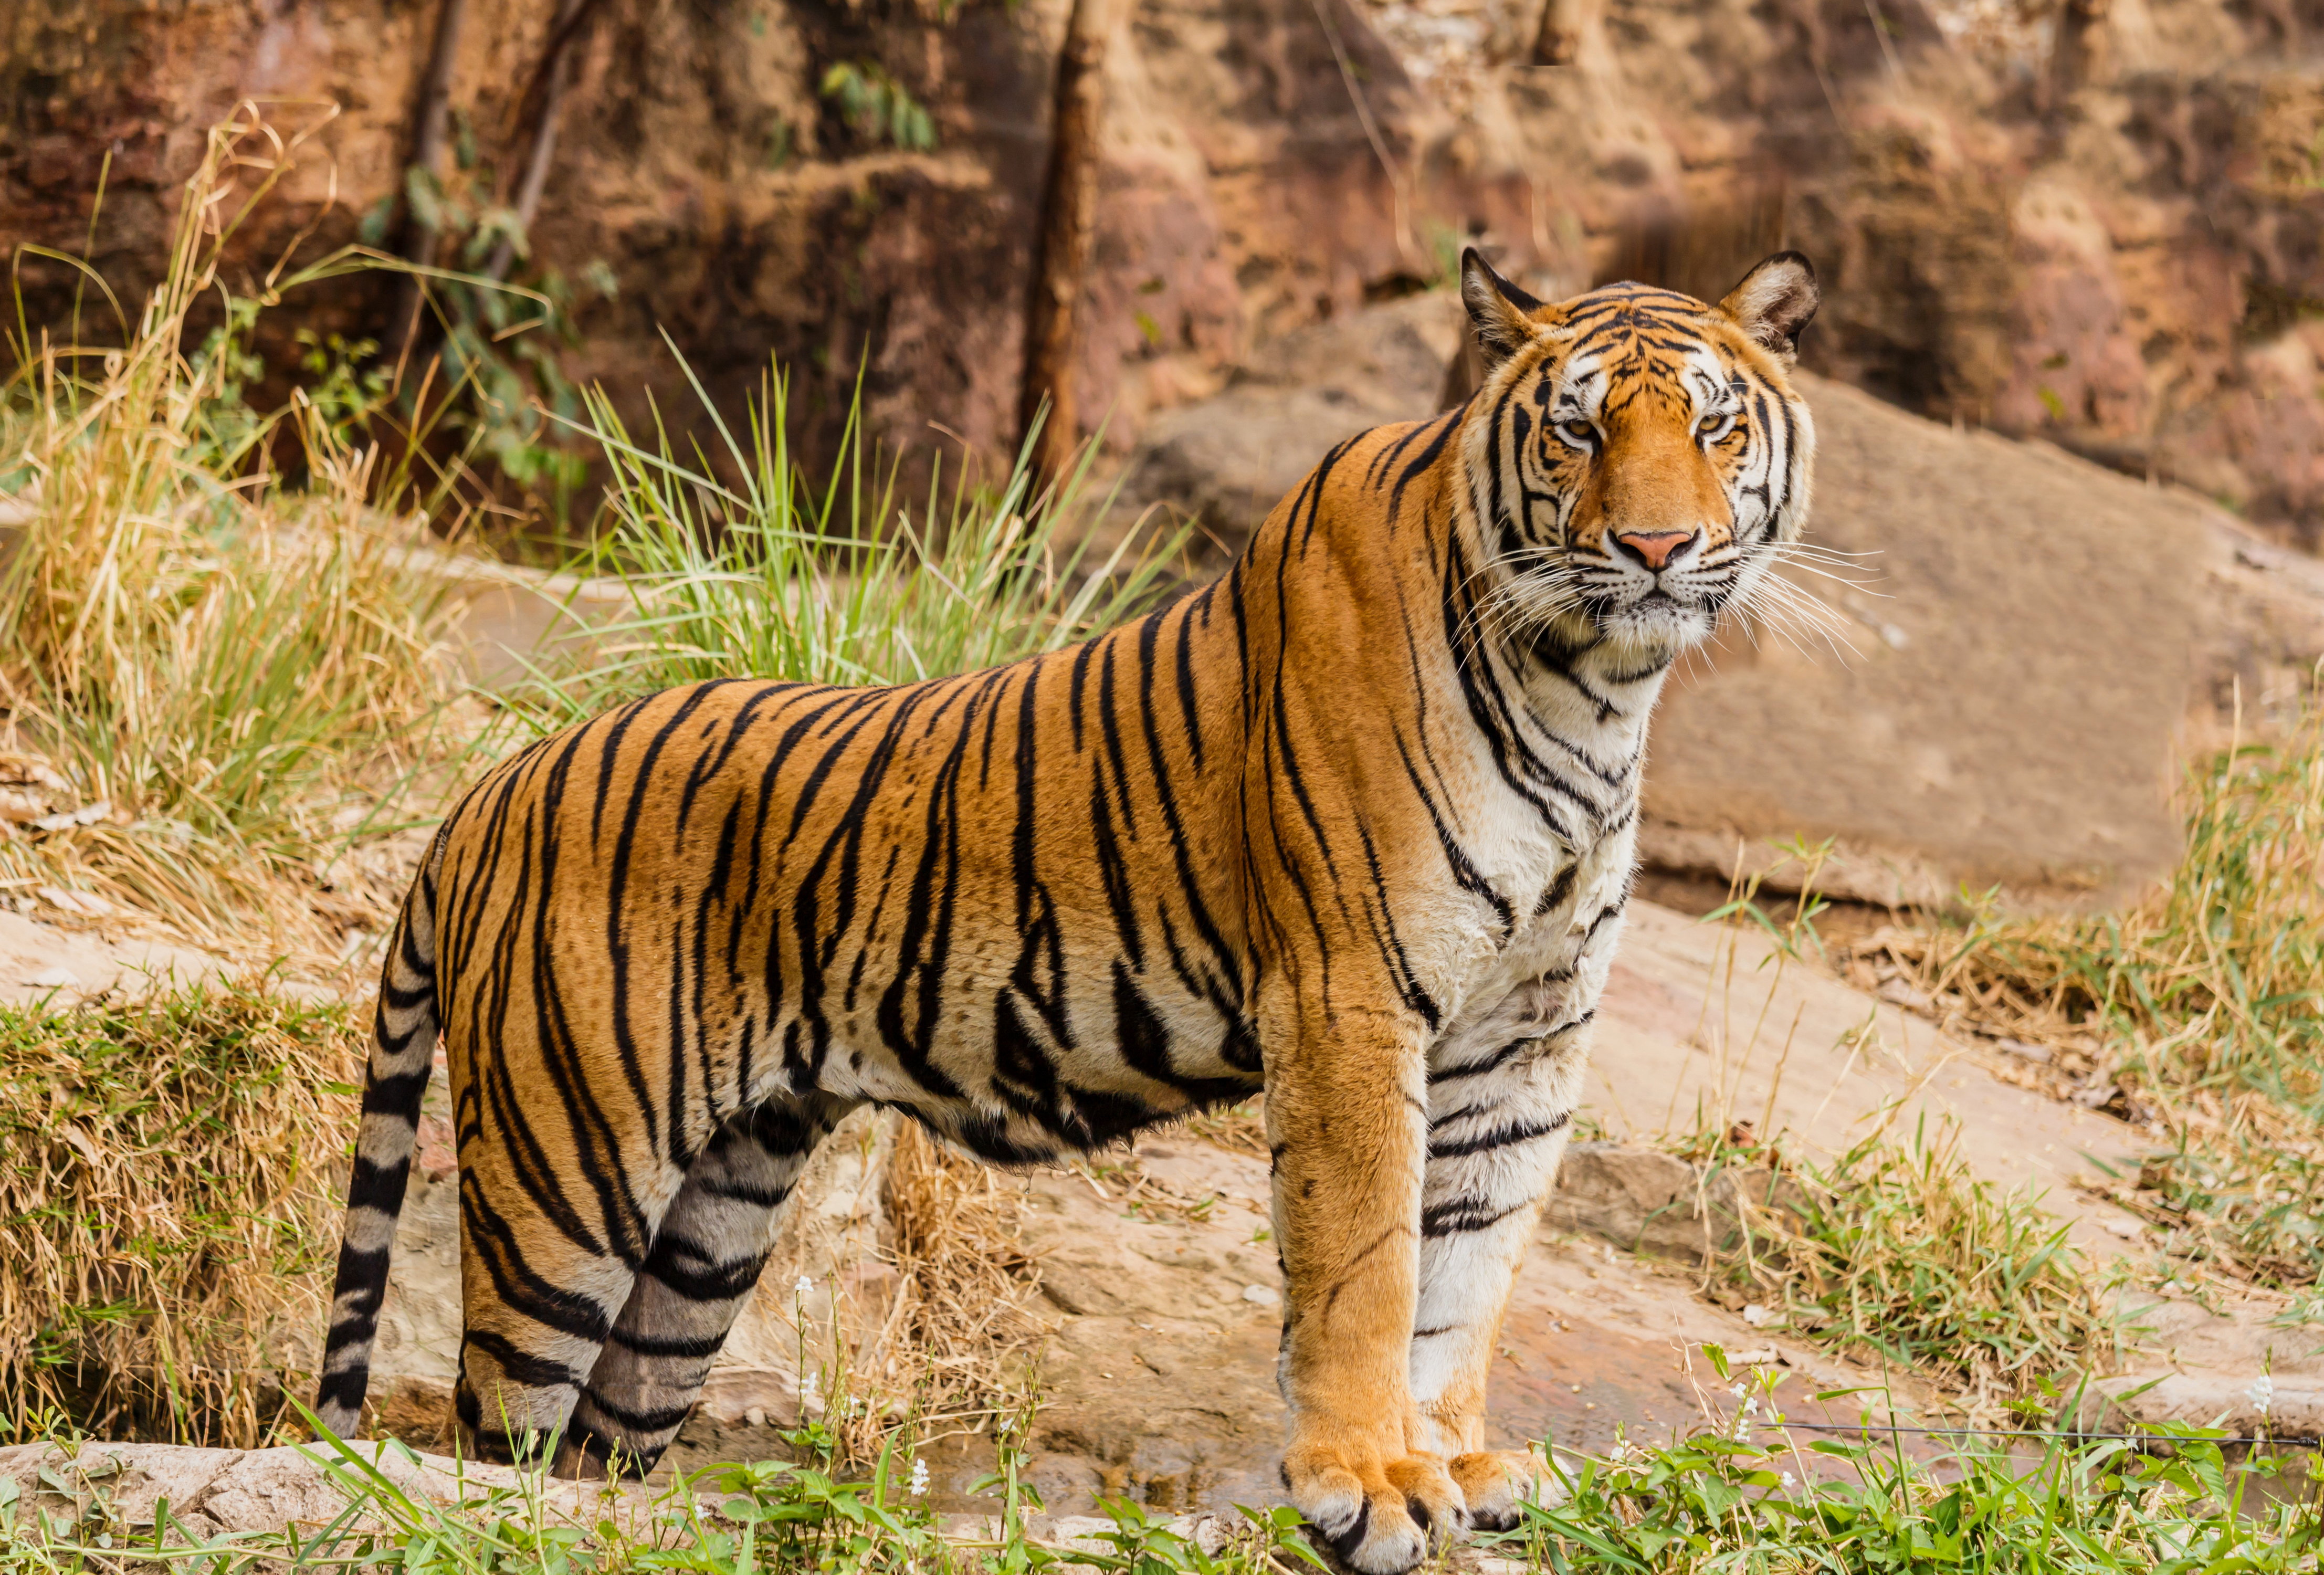 File:An Indian tiger in the wild. Royal, Bengal tiger (27466438332 ...